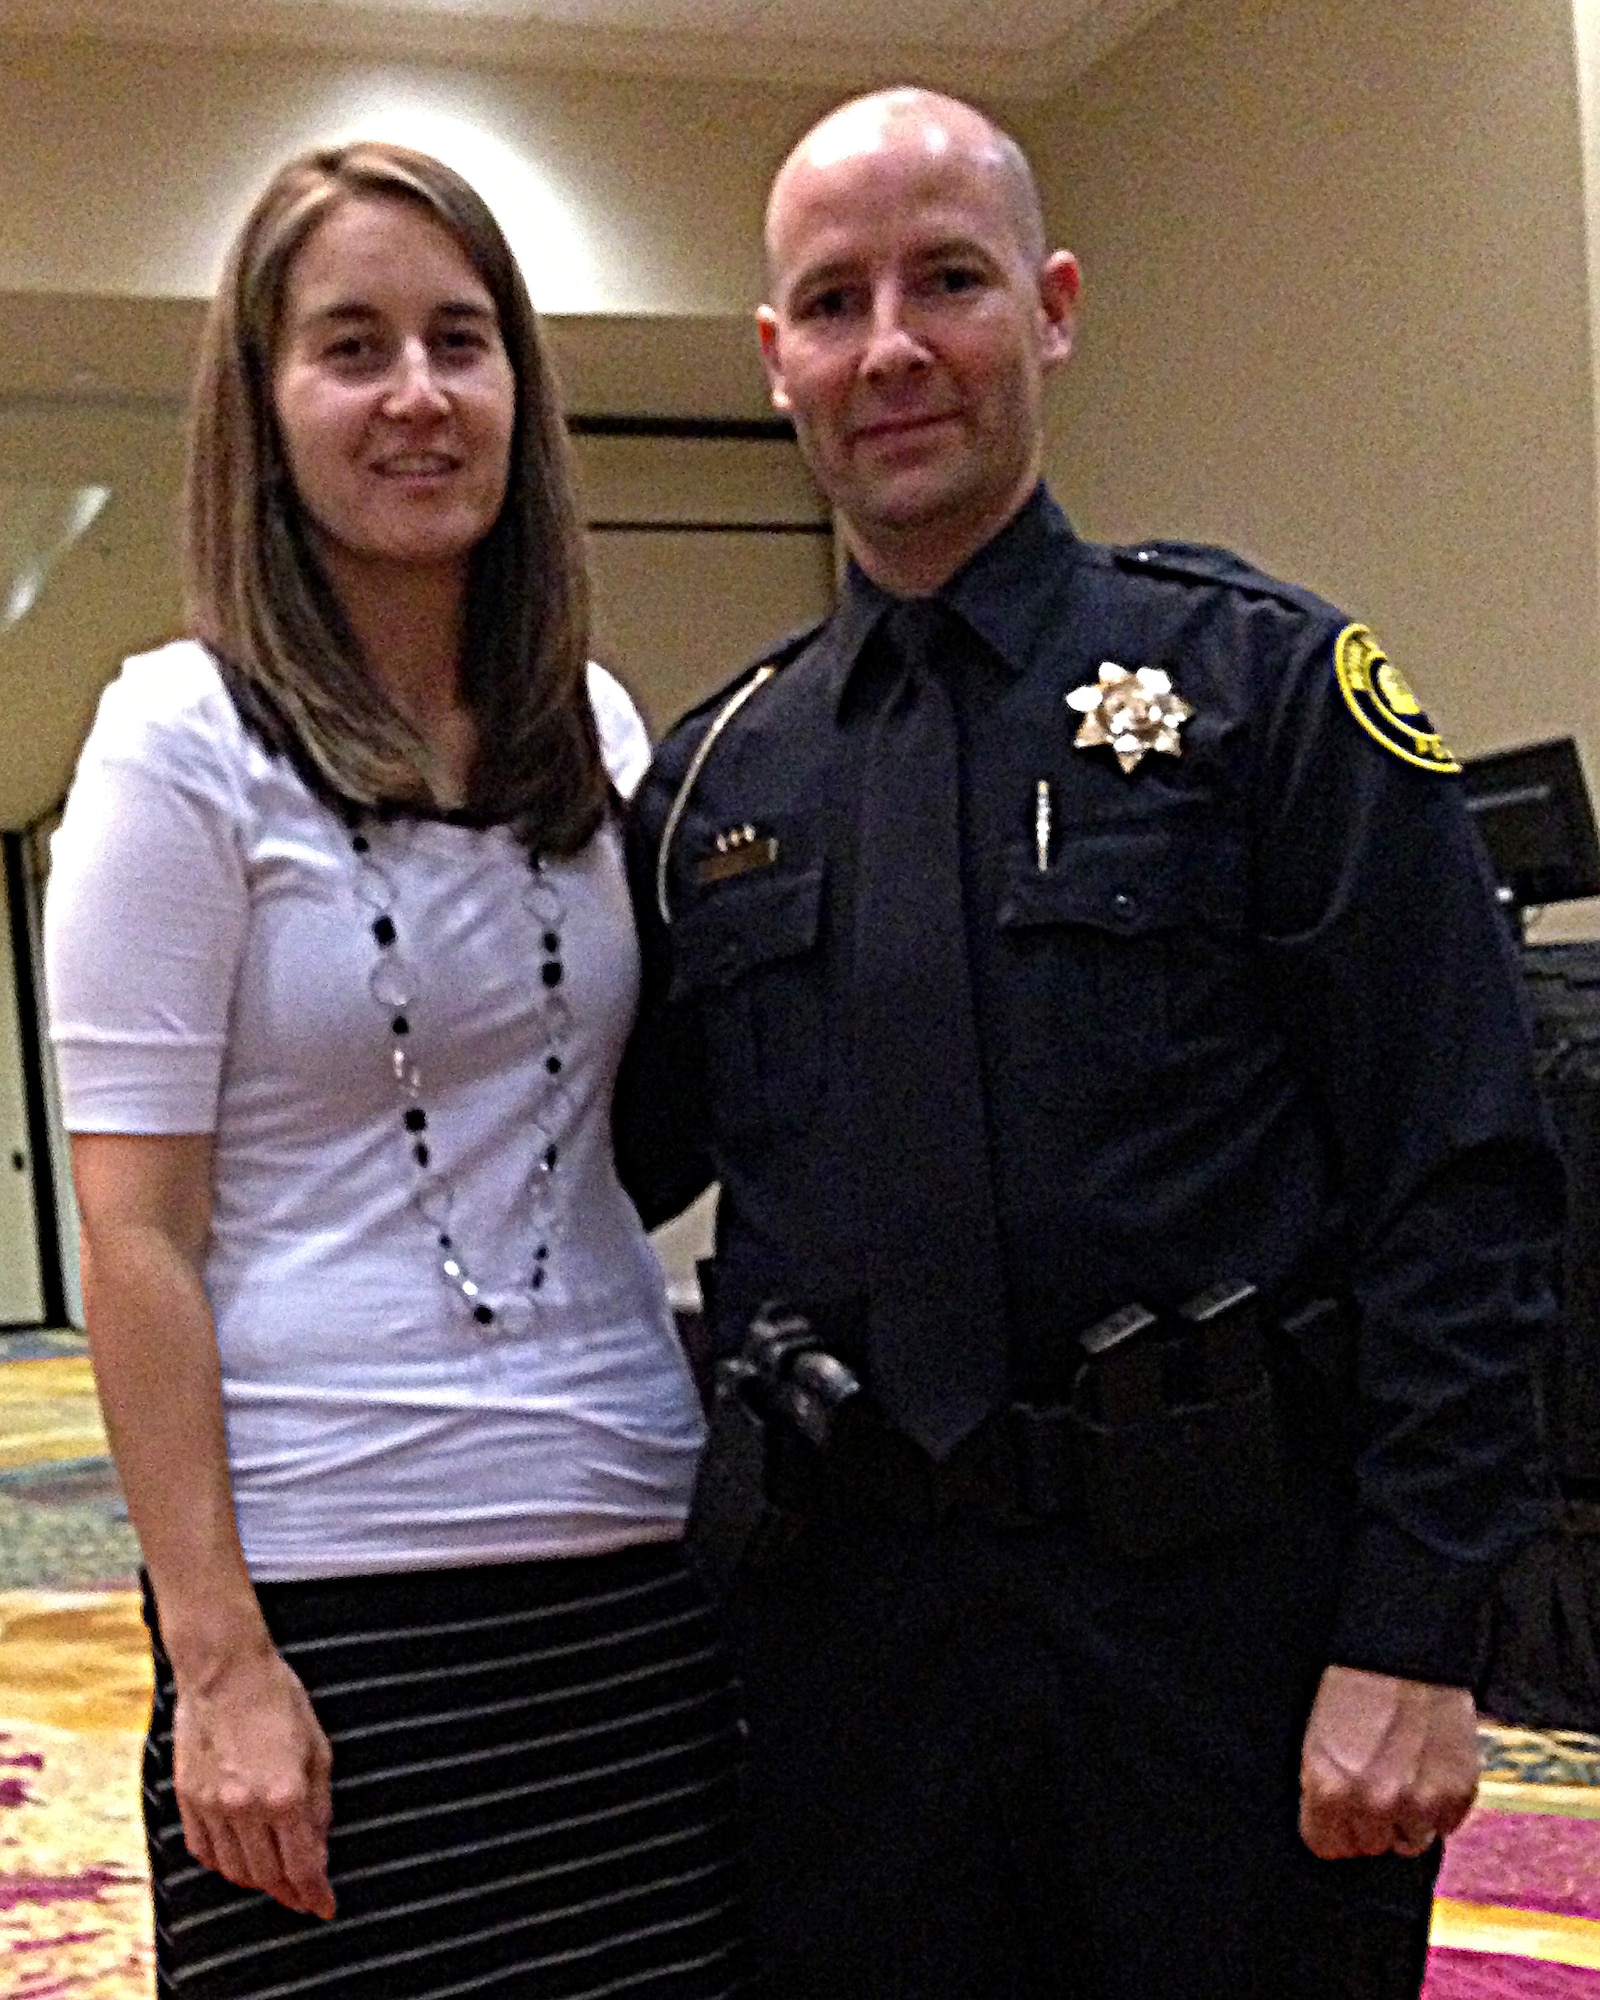 Tech Sgt. Mike Paletta, a Utah Air National Guardsman from the 151st Security Forces Squadron, poses with his wife Debbie at the Salt Lake City Fire Department's 2012 Awards Banquet Nov. 3. Paletta was awarded a Citizen Service Citation for performing CPR to save the life of a driver who had suffered a heart attack Jan. 26. In his civilian career, Paletta is an investigator for the Motor Vehicle Enforcement Division. (U.S. Air Force photo courtesy of Mike Paletta)